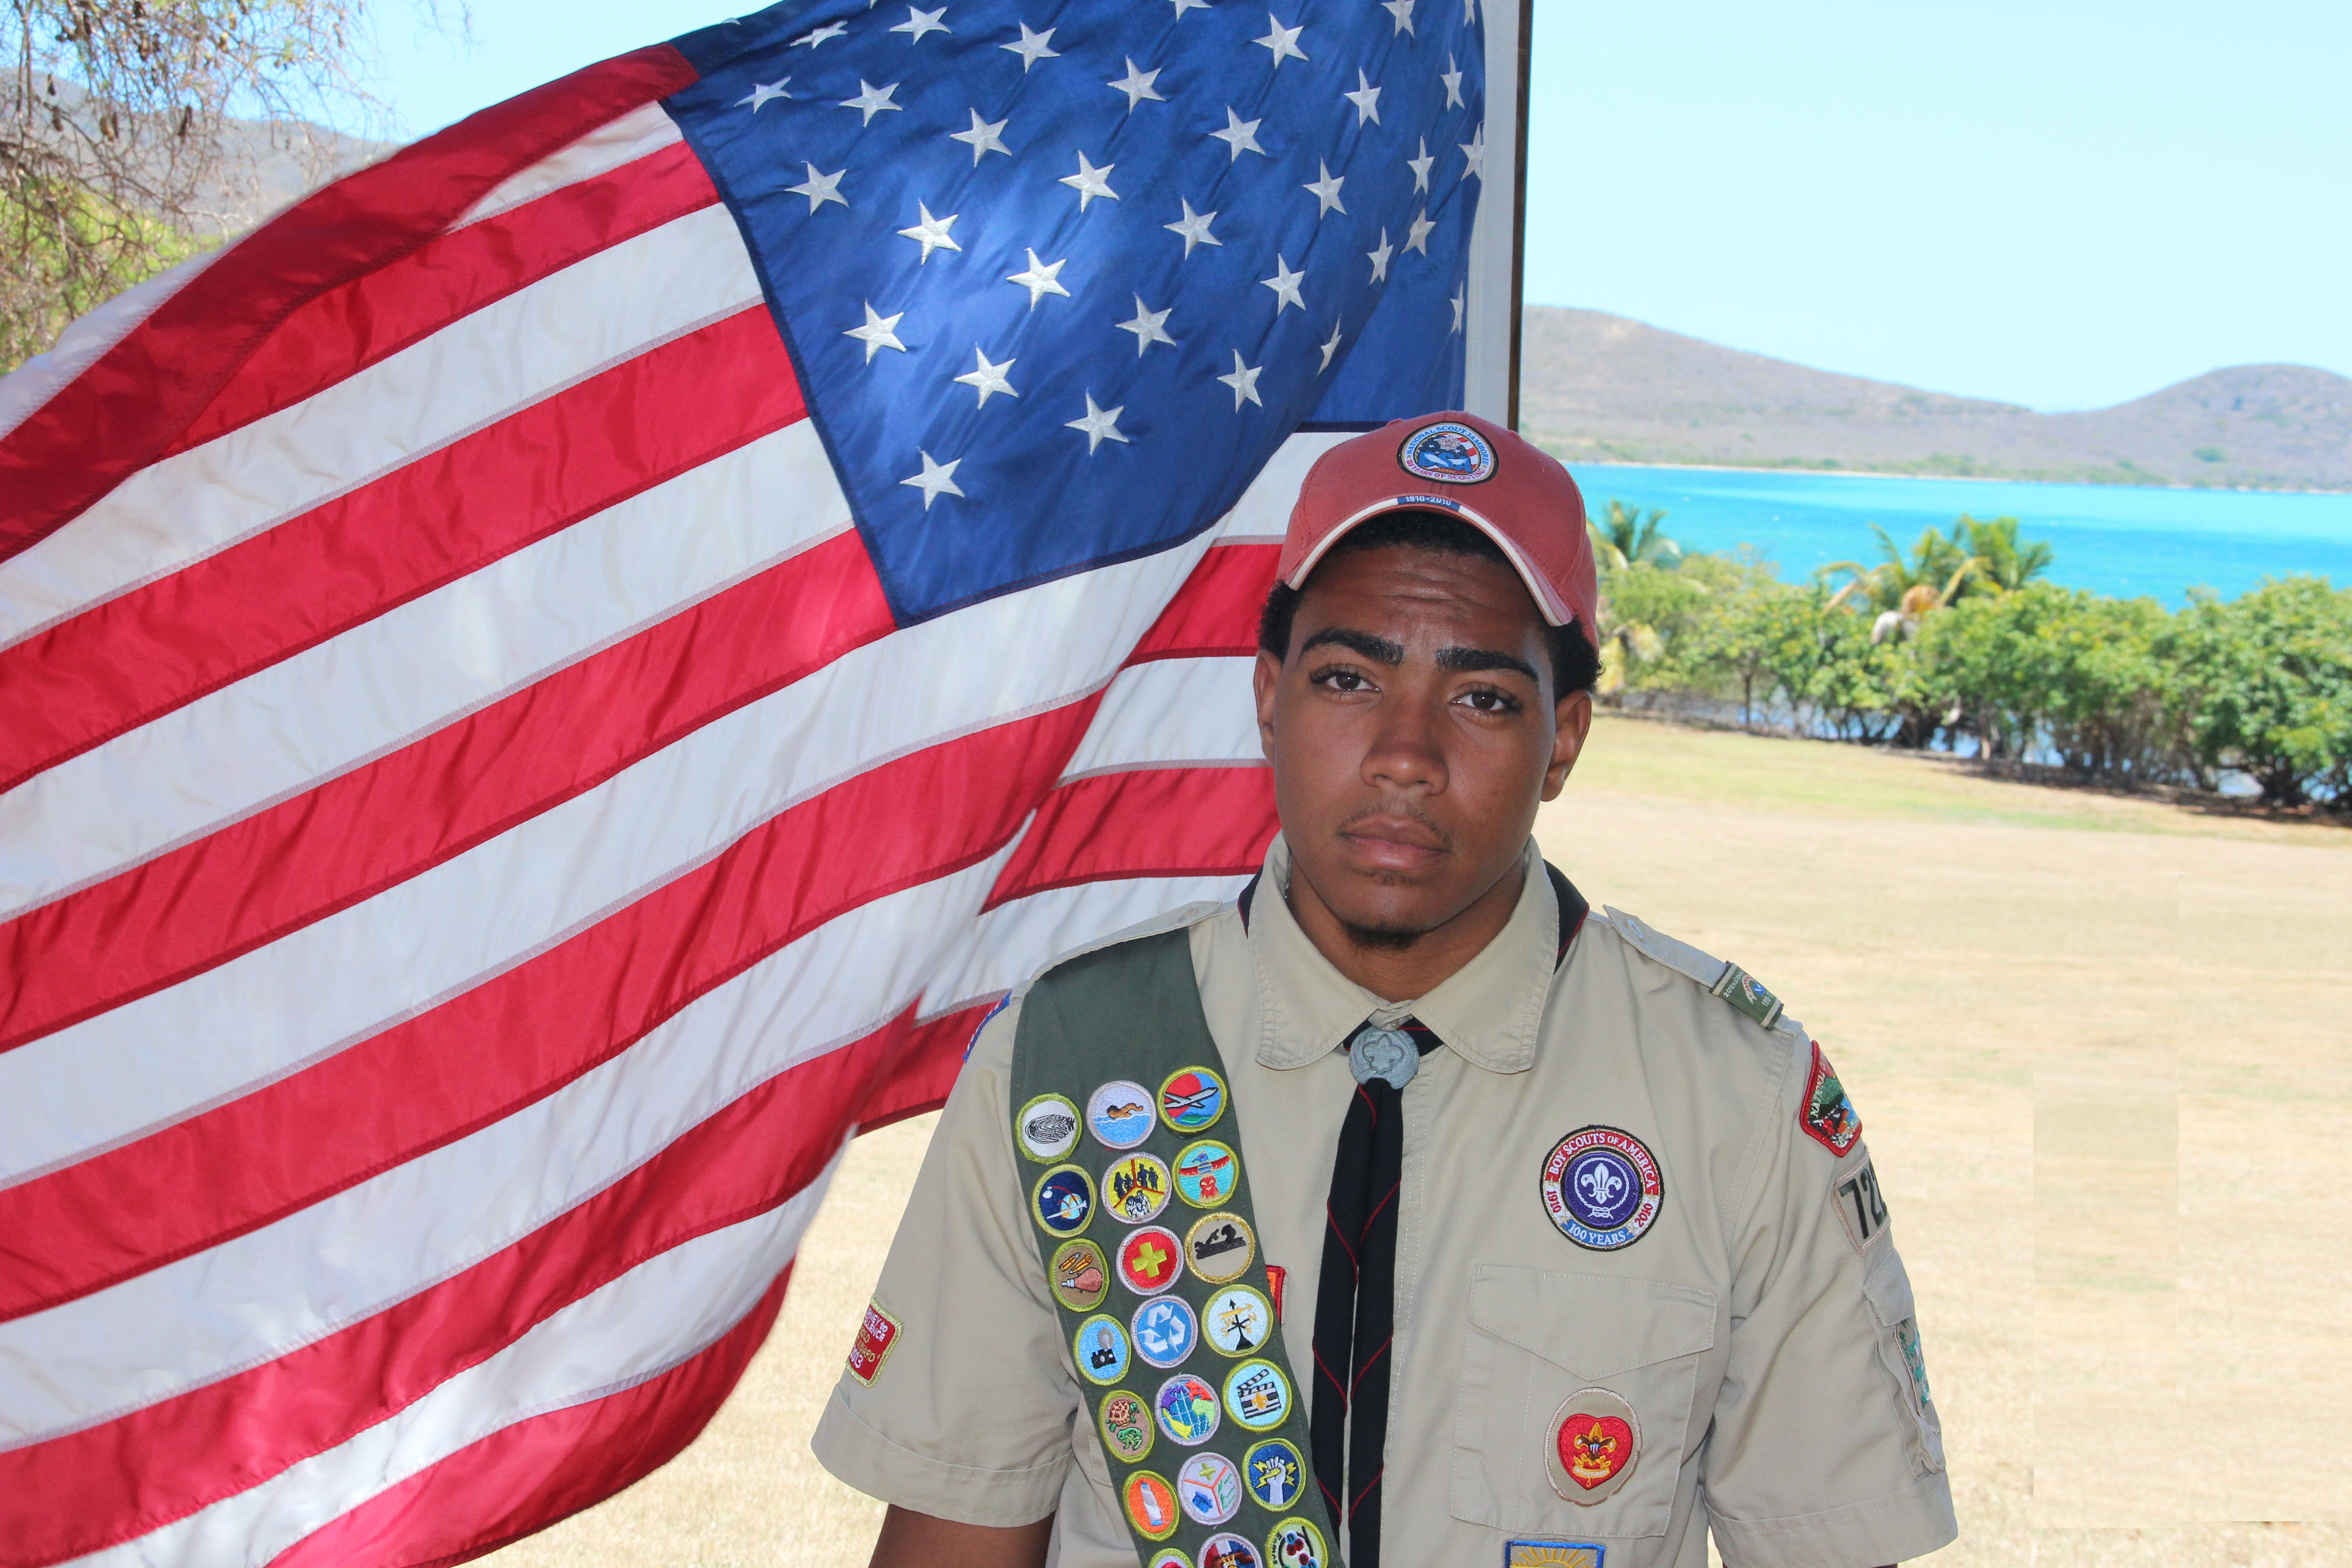 Michael Christopher Brooks earns Eagle Scout status